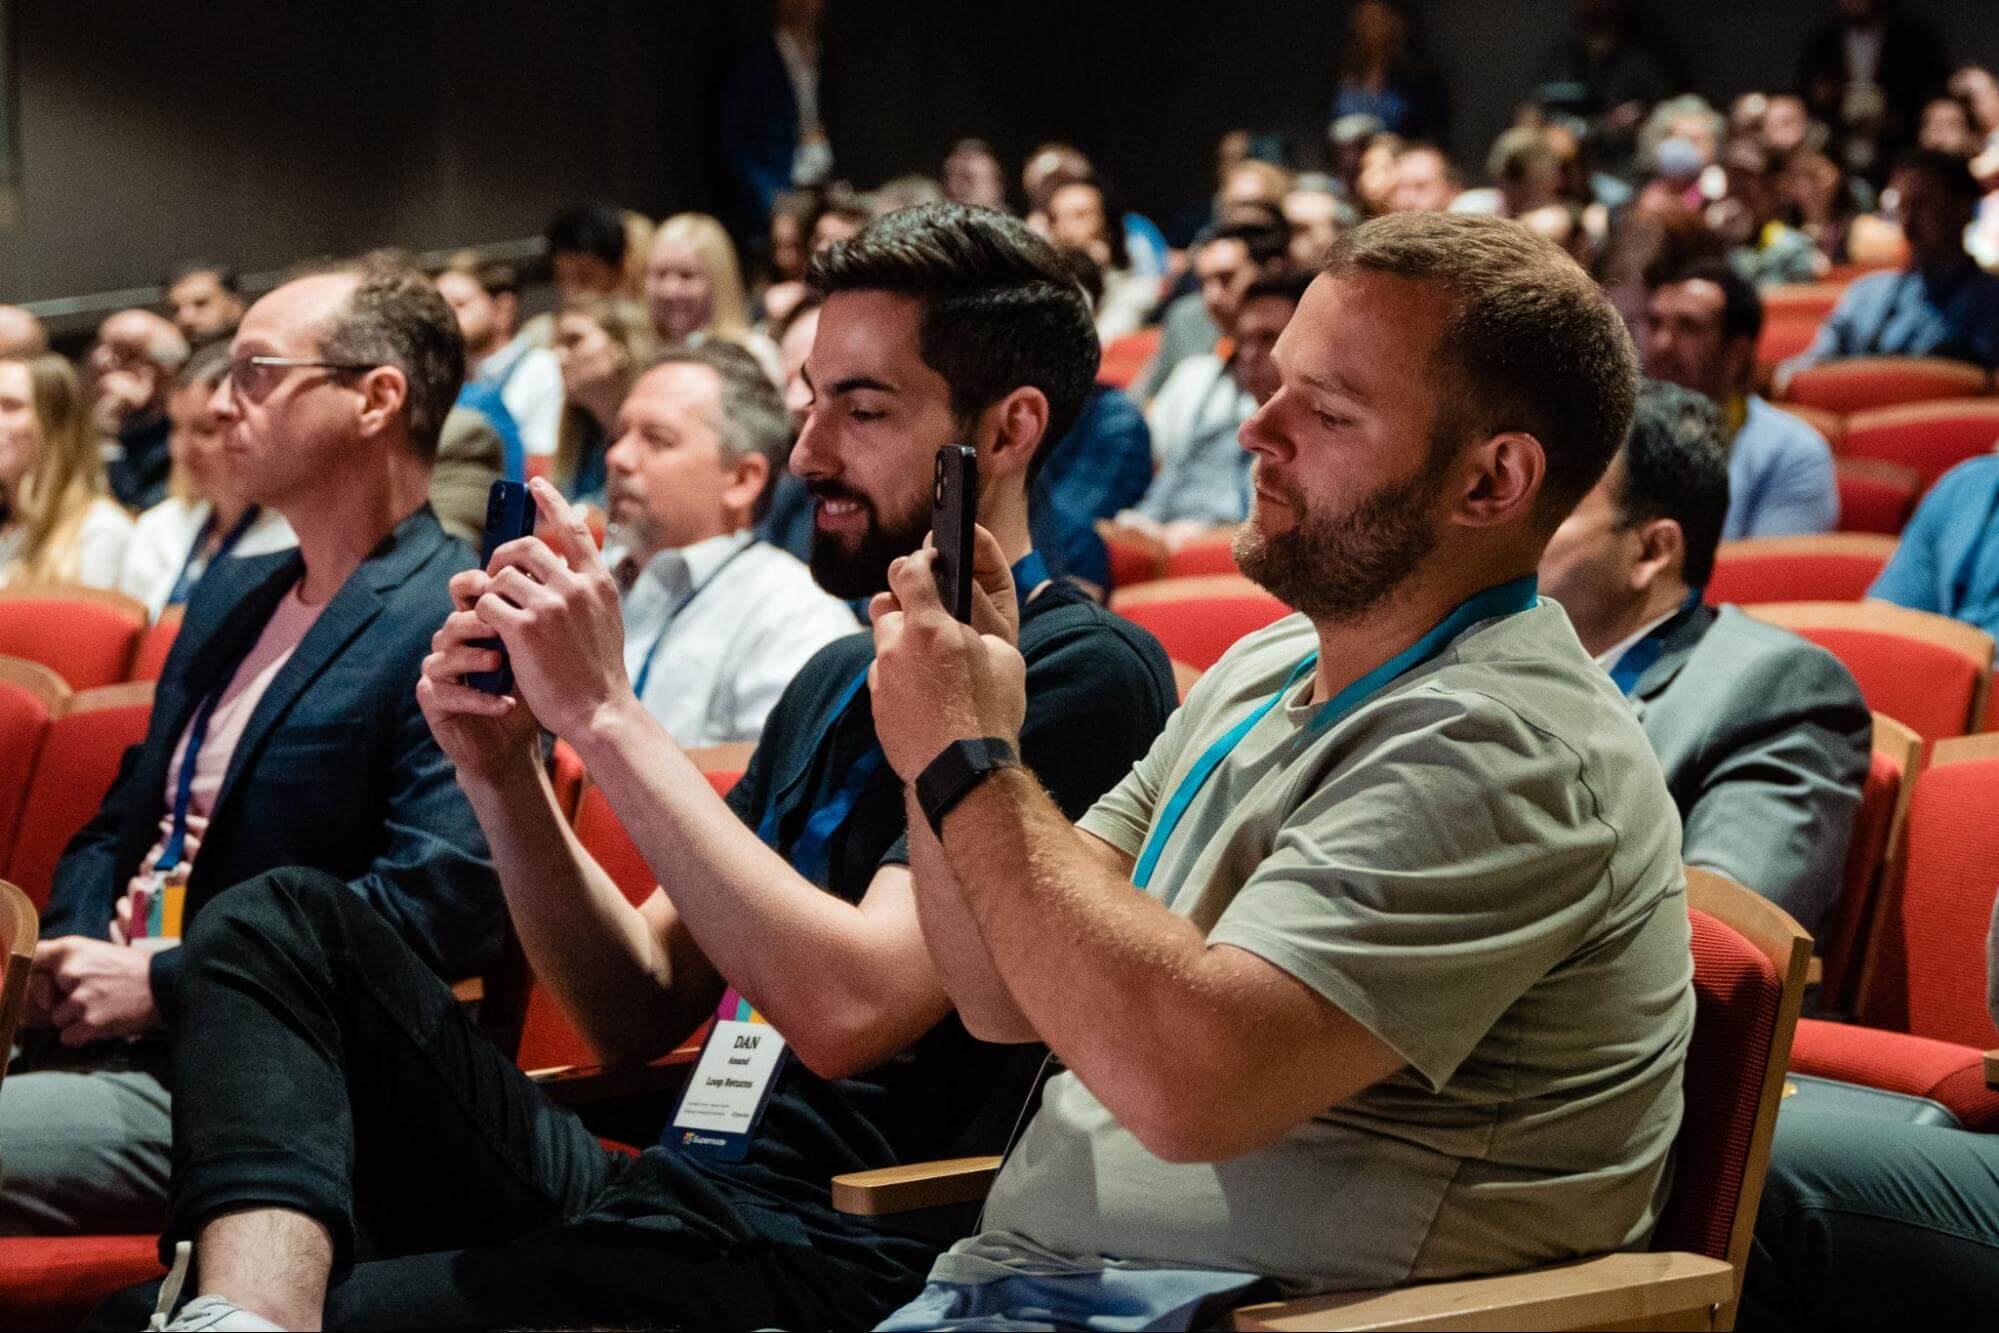 crossbeam-supernode-conference-partnerships-audience